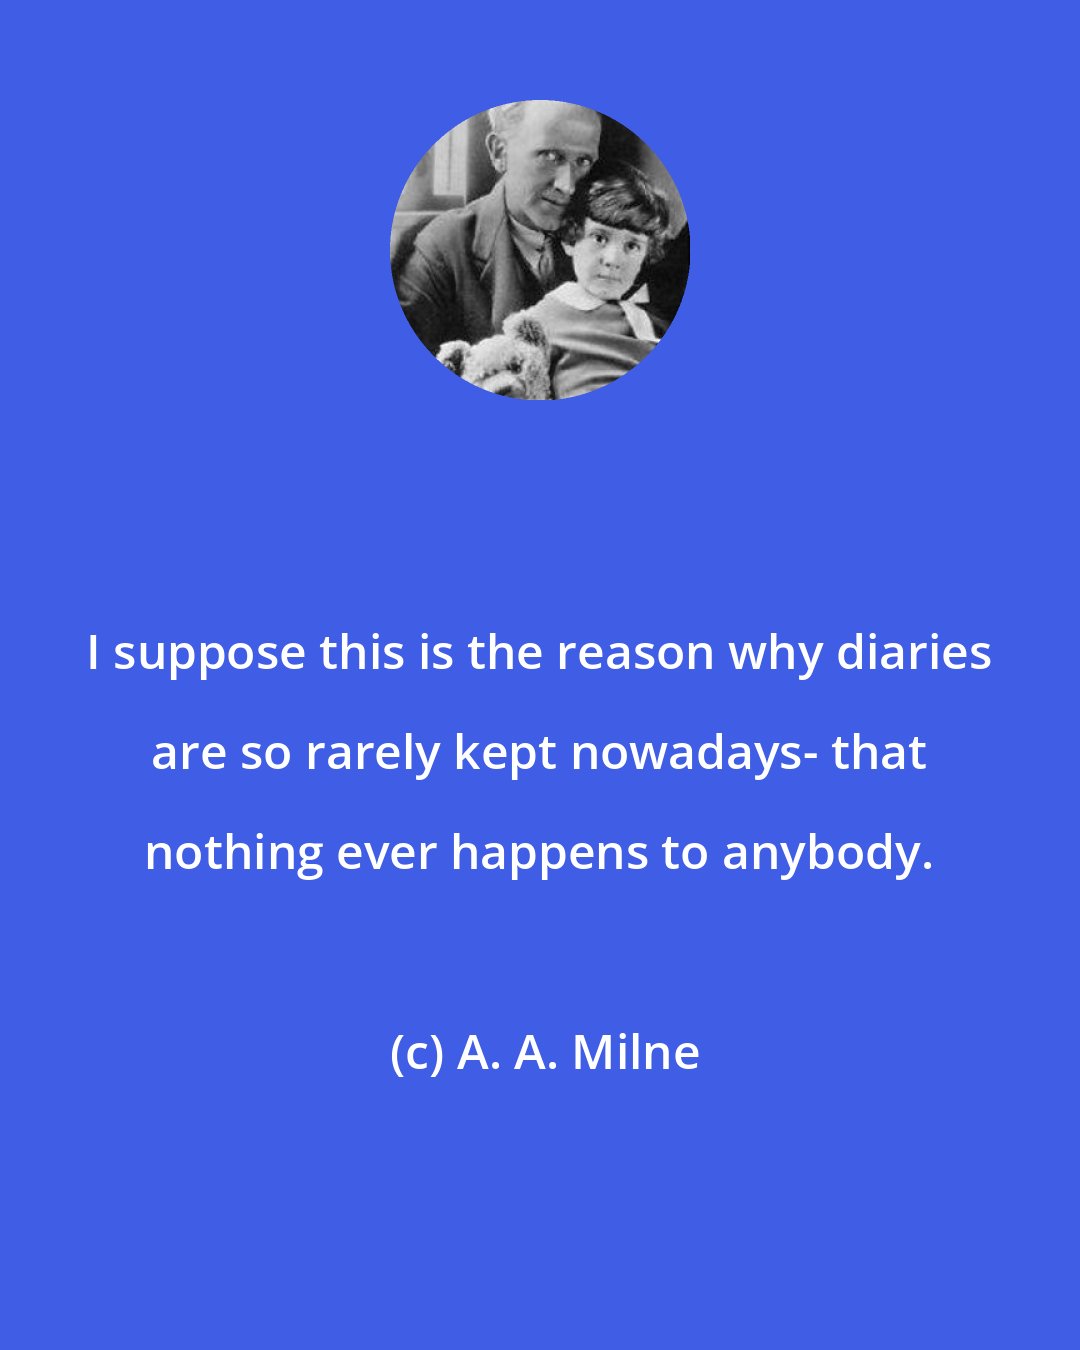 A. A. Milne: I suppose this is the reason why diaries are so rarely kept nowadays- that nothing ever happens to anybody.